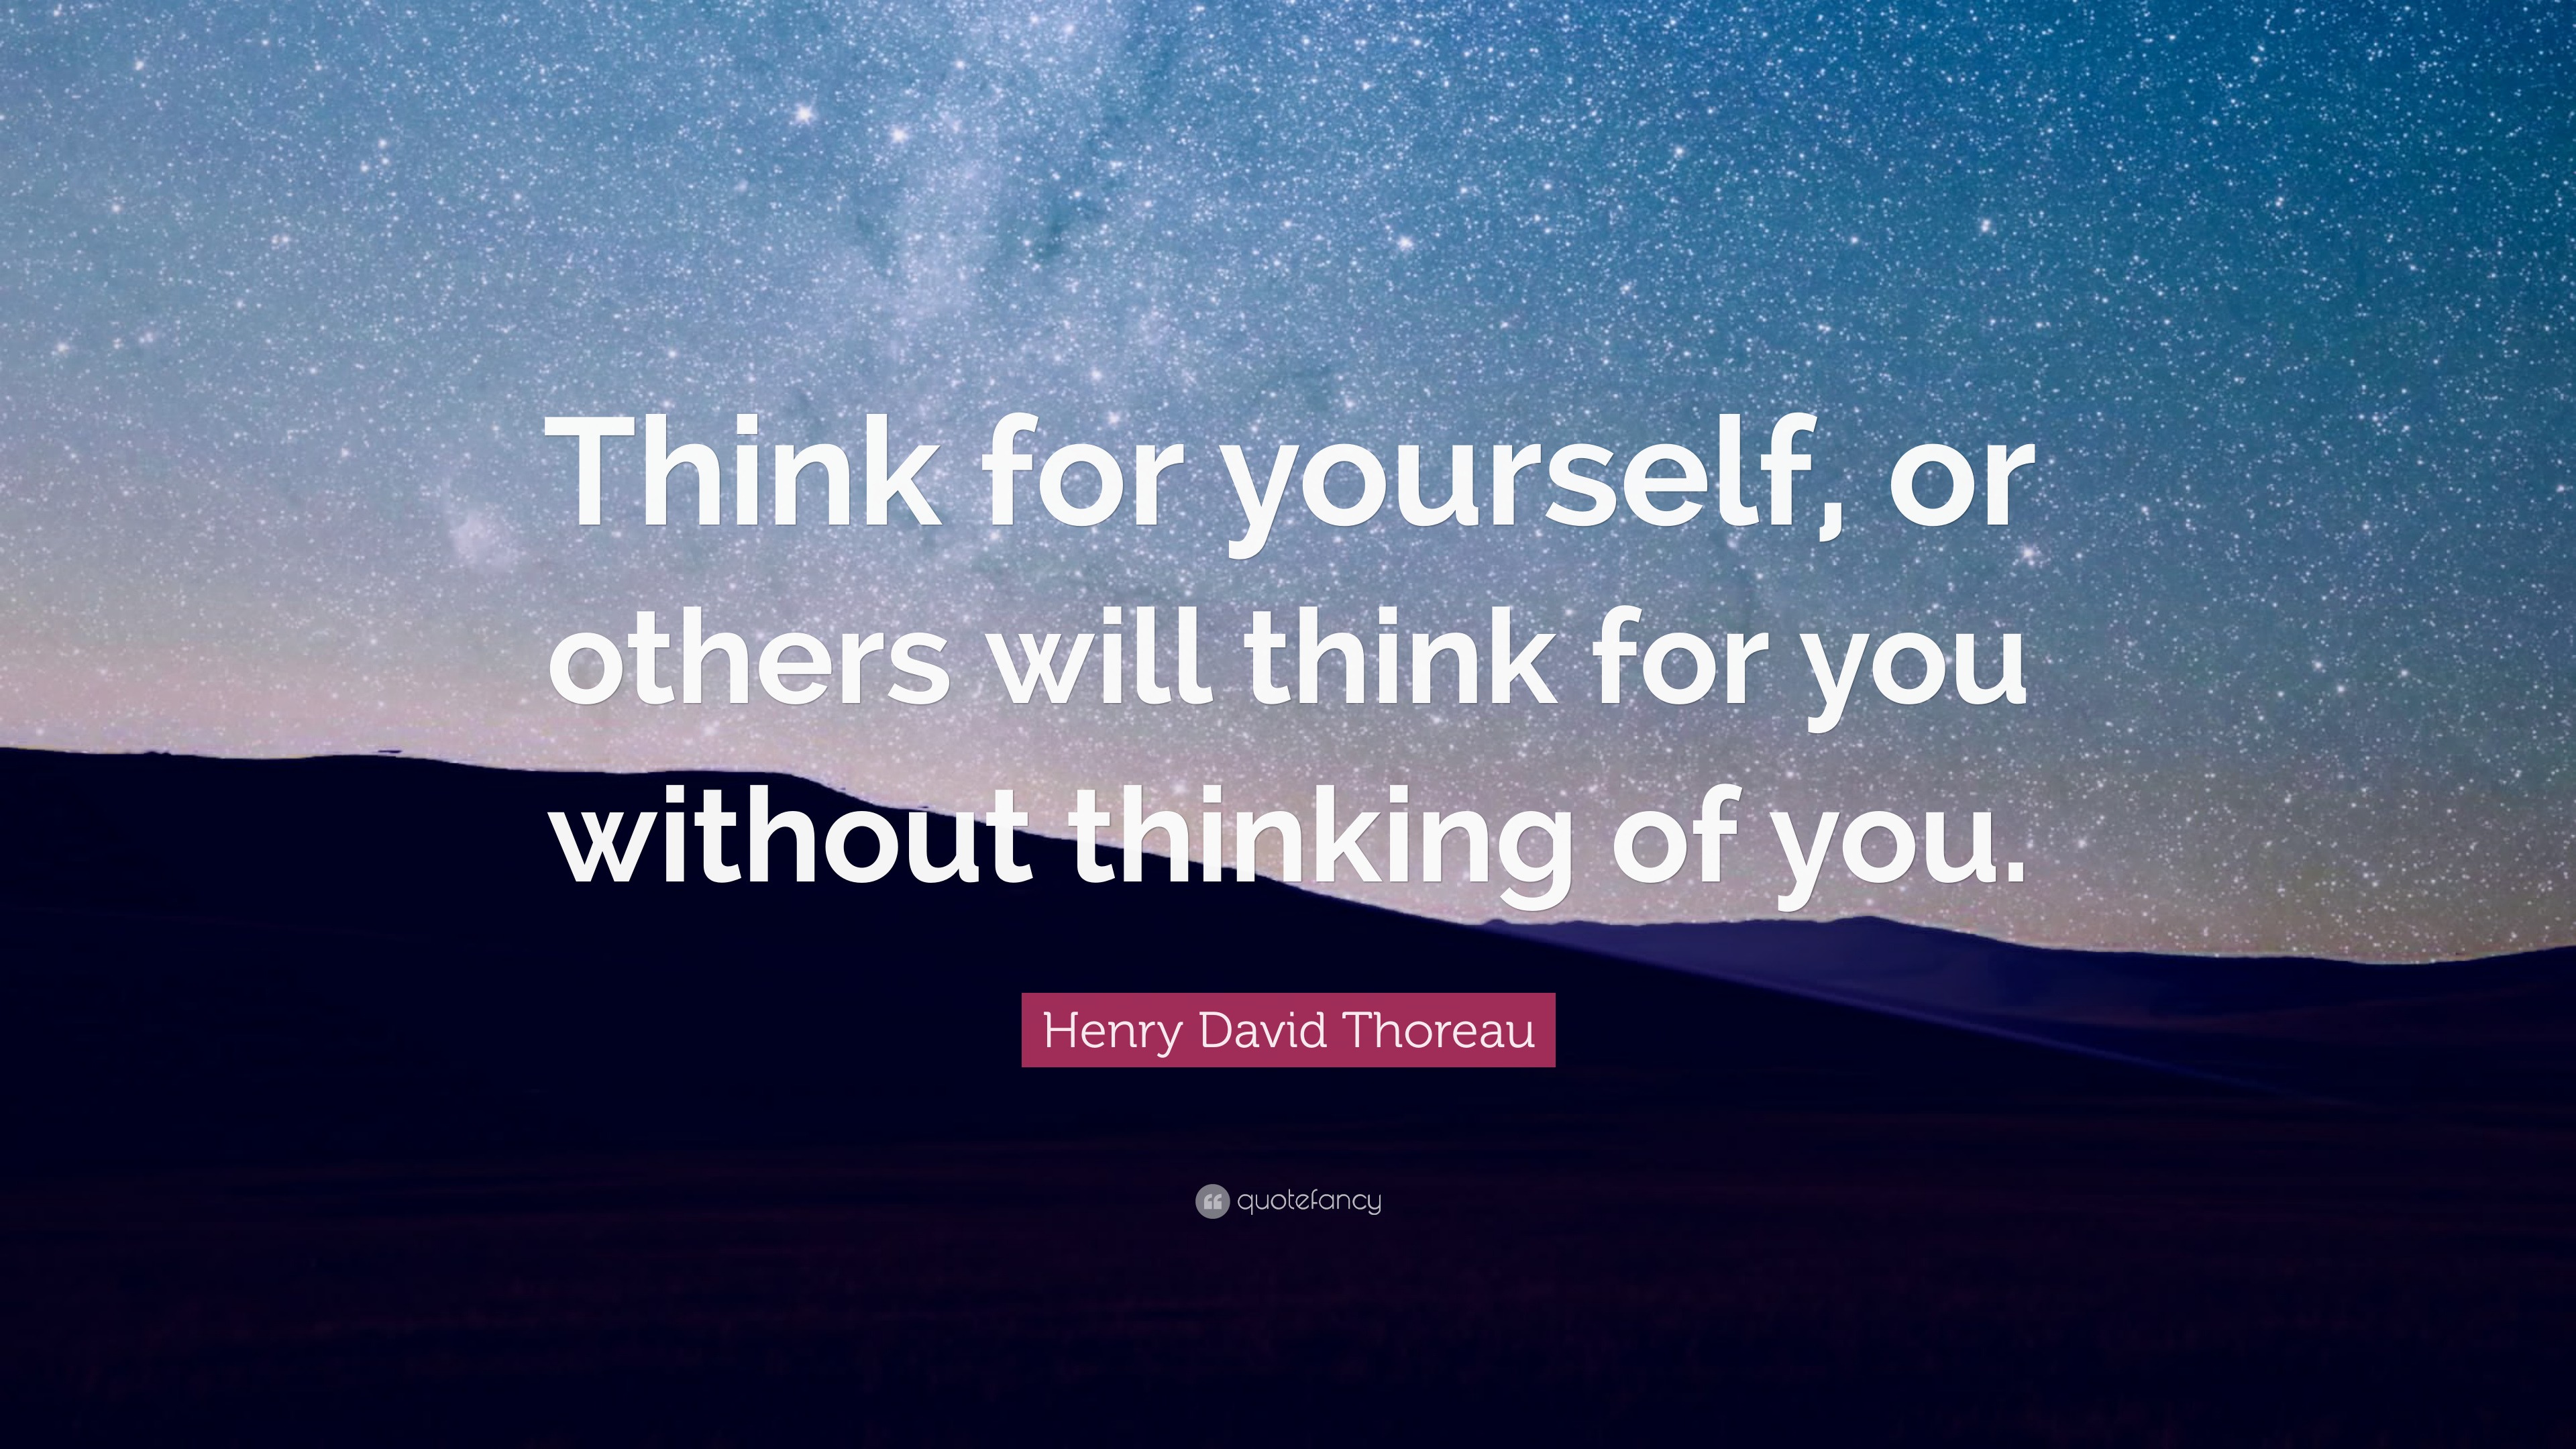 Henry David Thoreau Quote: “Think for yourself, or others will think